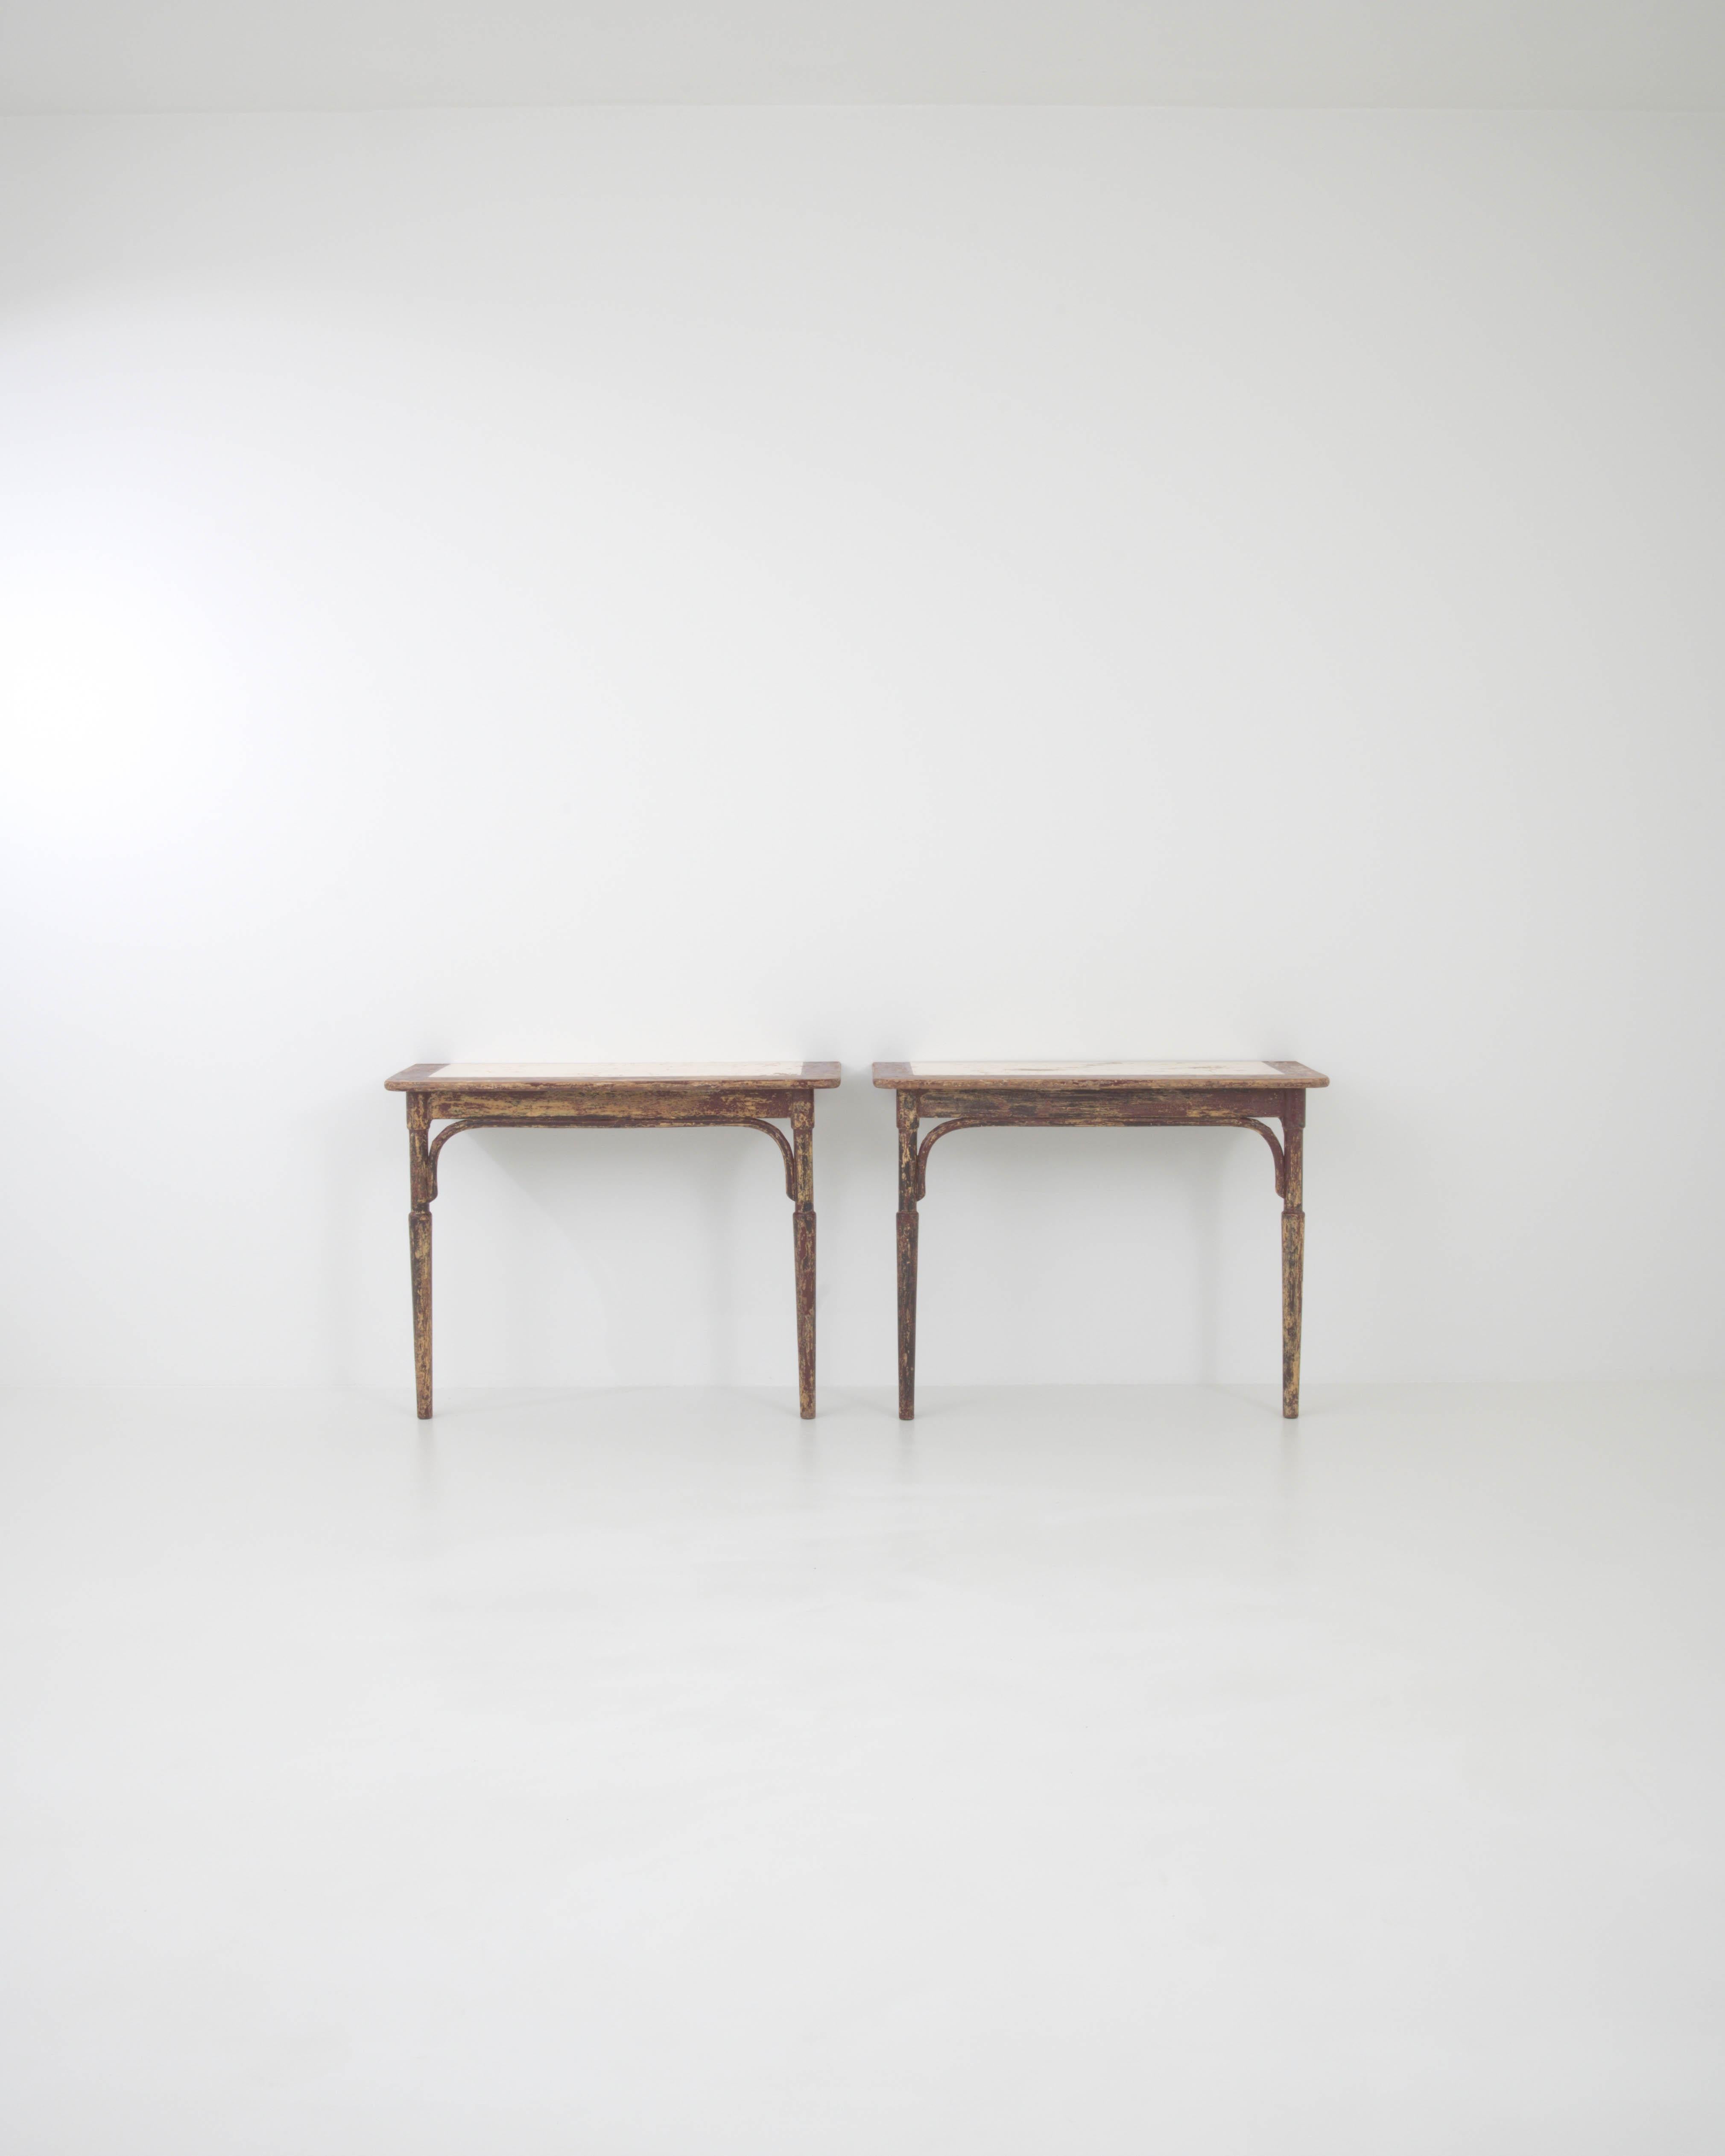 Step into a realm where vintage charm meets artisanal craftsmanship with this stunning pair of Early 20th Century French Wood Patinated Console Tables by Thonet. Each table stands as a testament to the enduring allure of classic design, with